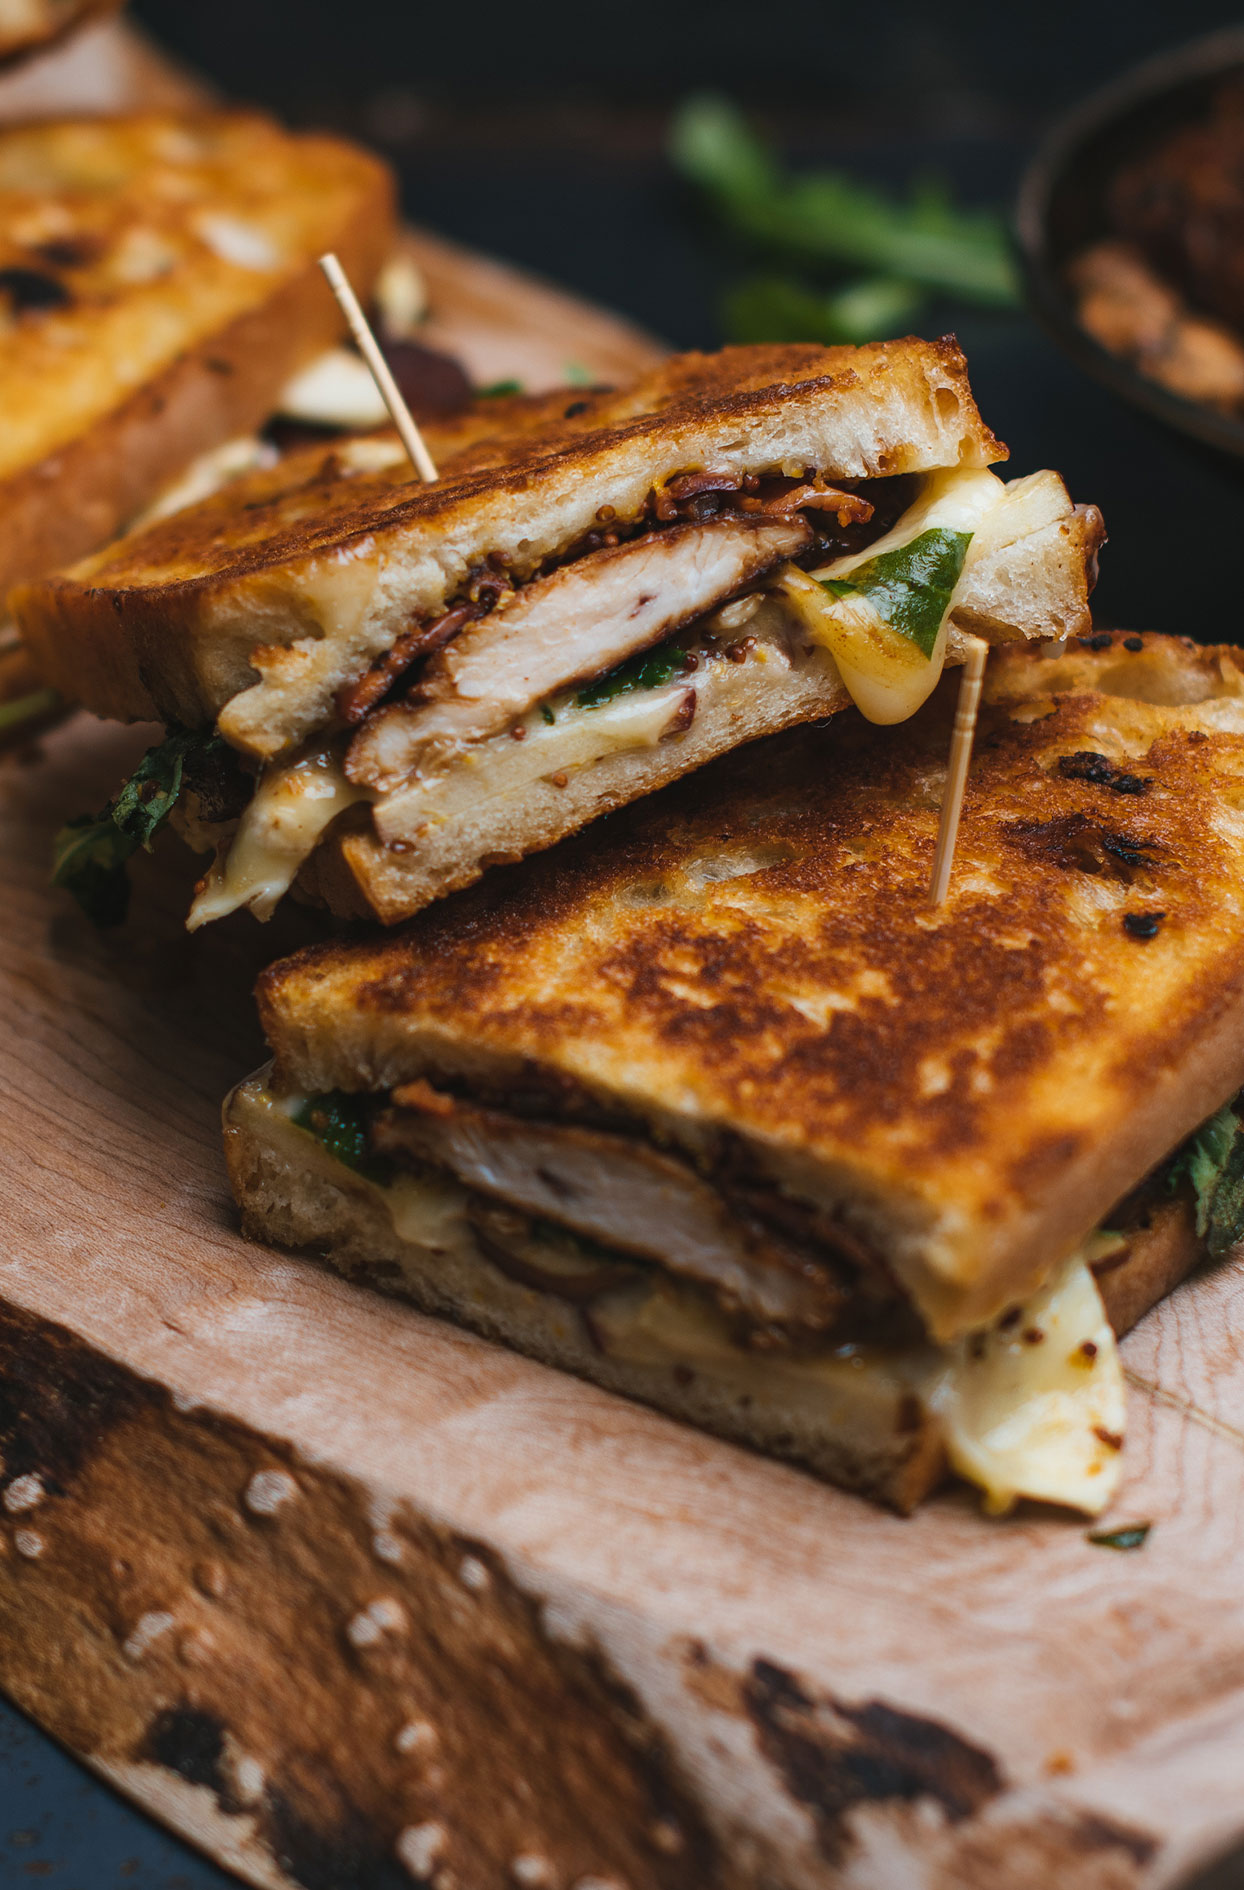 Grilled cheese with balsamic vinegar grilled chicken, brie cheese and apples